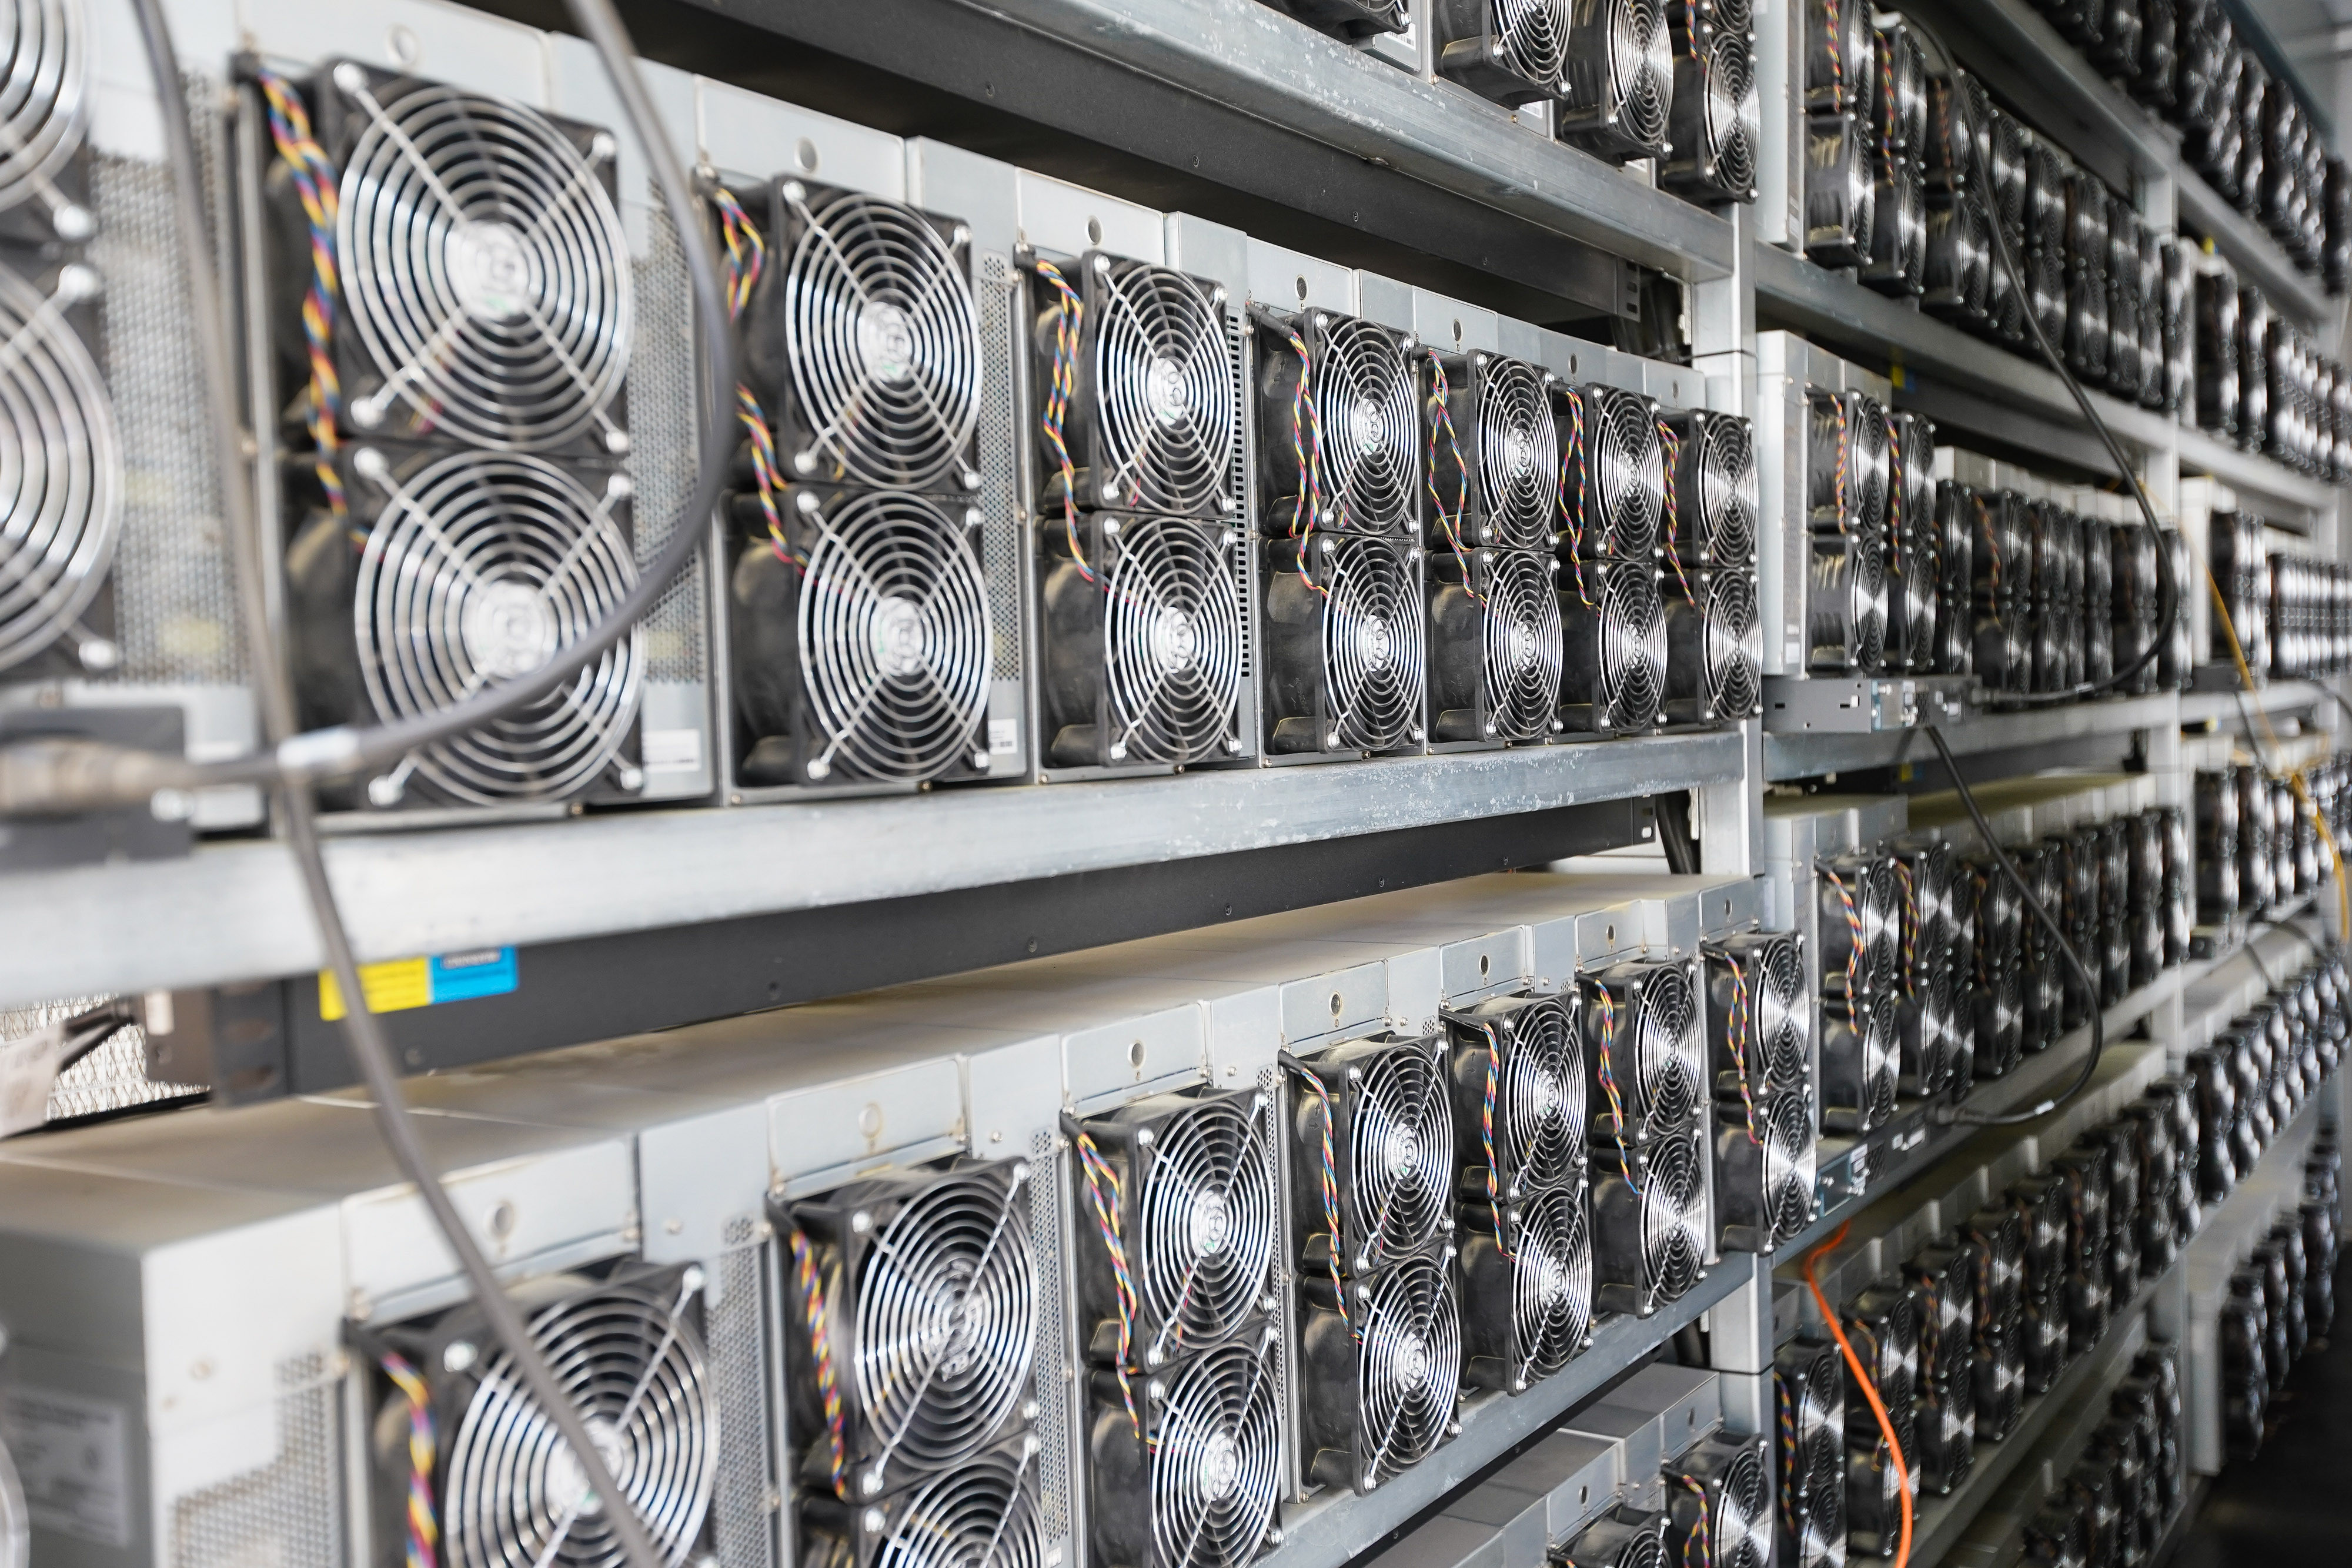 An array of bitcoin mining units inside a container at a Cleanspark facility in College Park, Georgia, U.S., on Friday, April 22, 2022. (Elijah Nouvelage / Bloomberg via Getty Images)